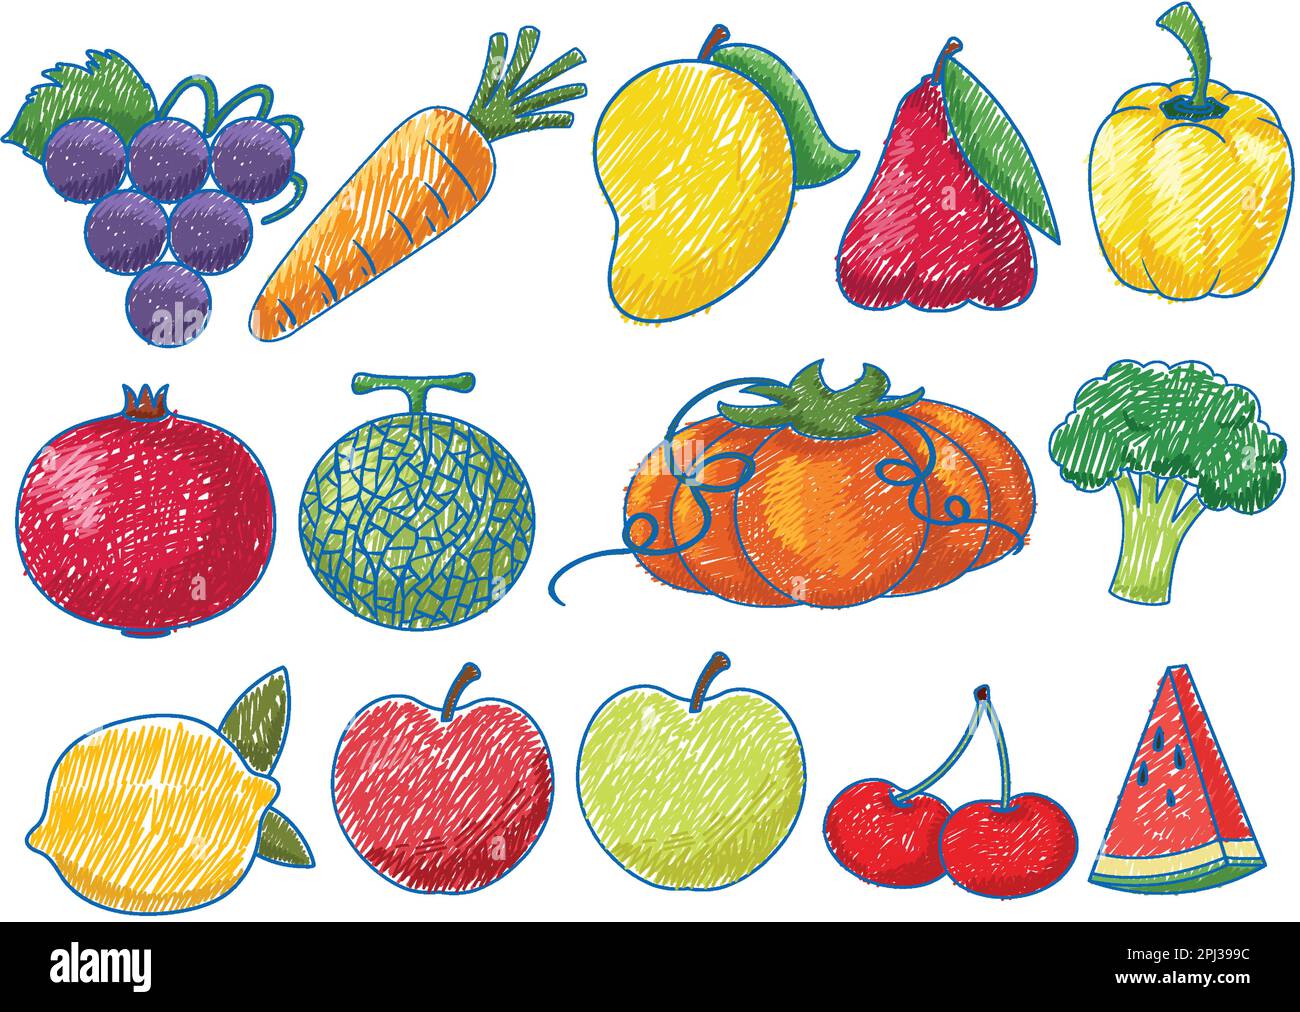 Fruit and Vegetable 2D drawings :: Behance